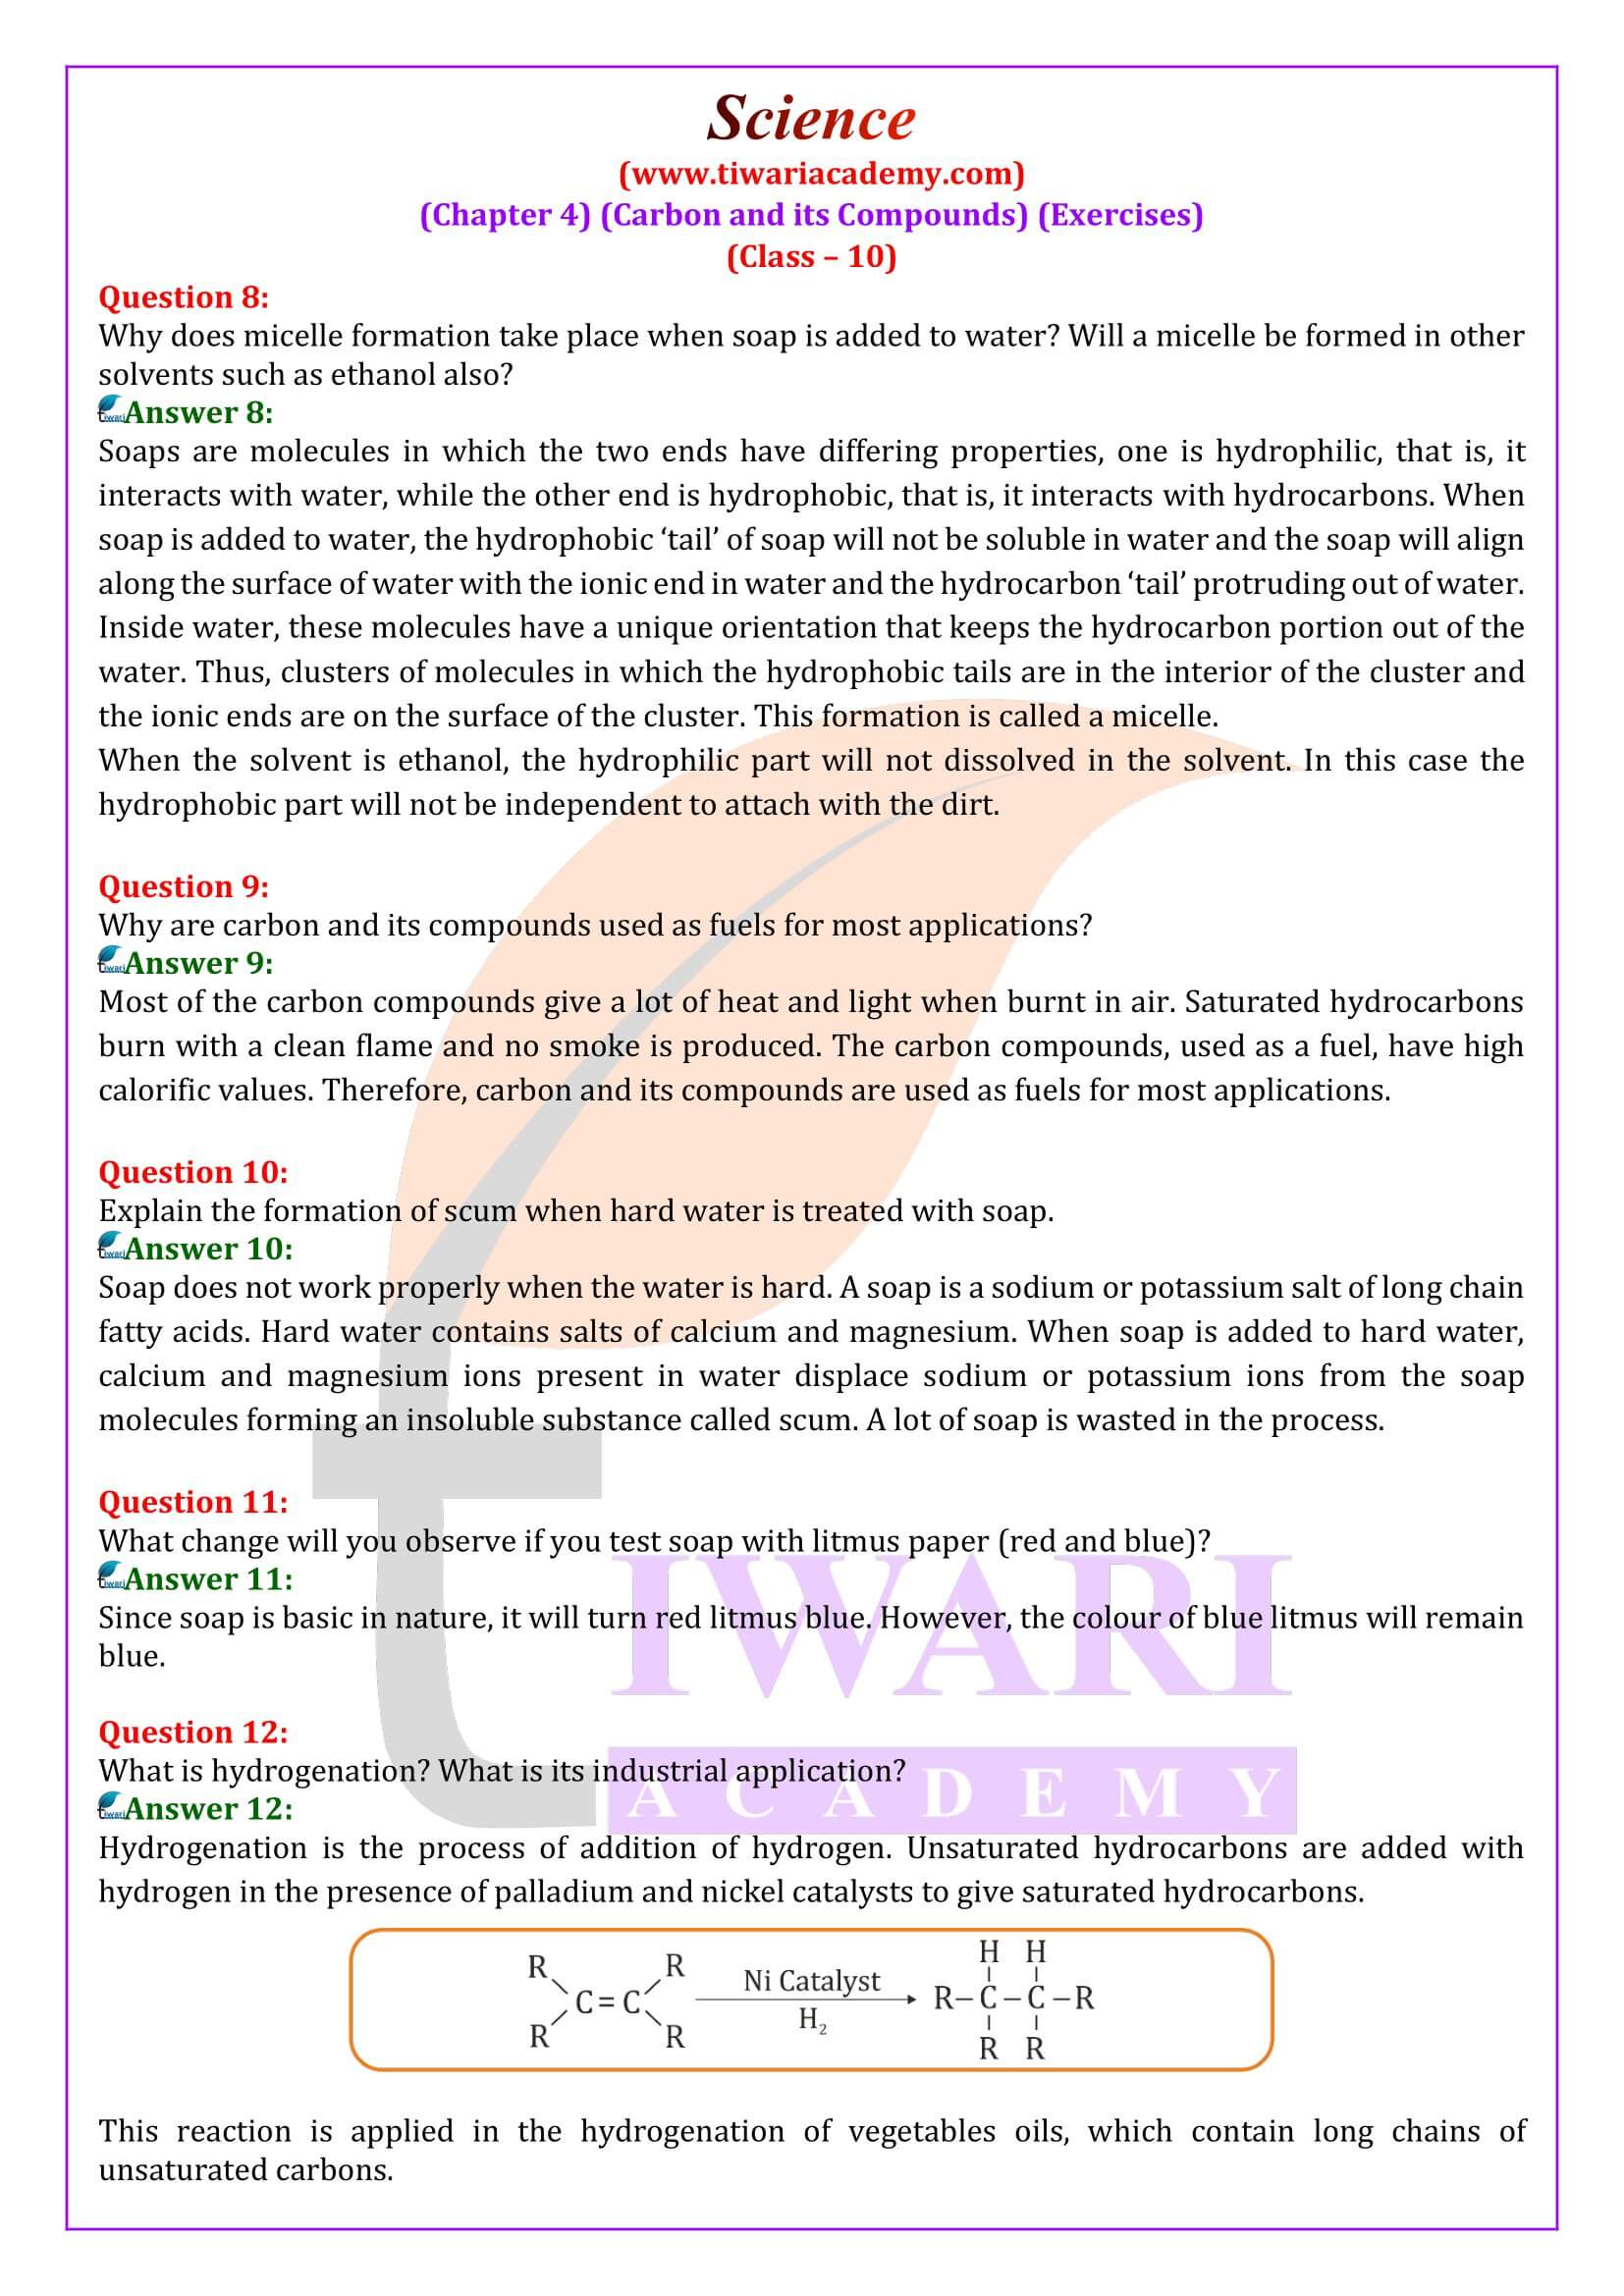 NCERT Solutions for Class 10 Science Chapter 4 Exercises